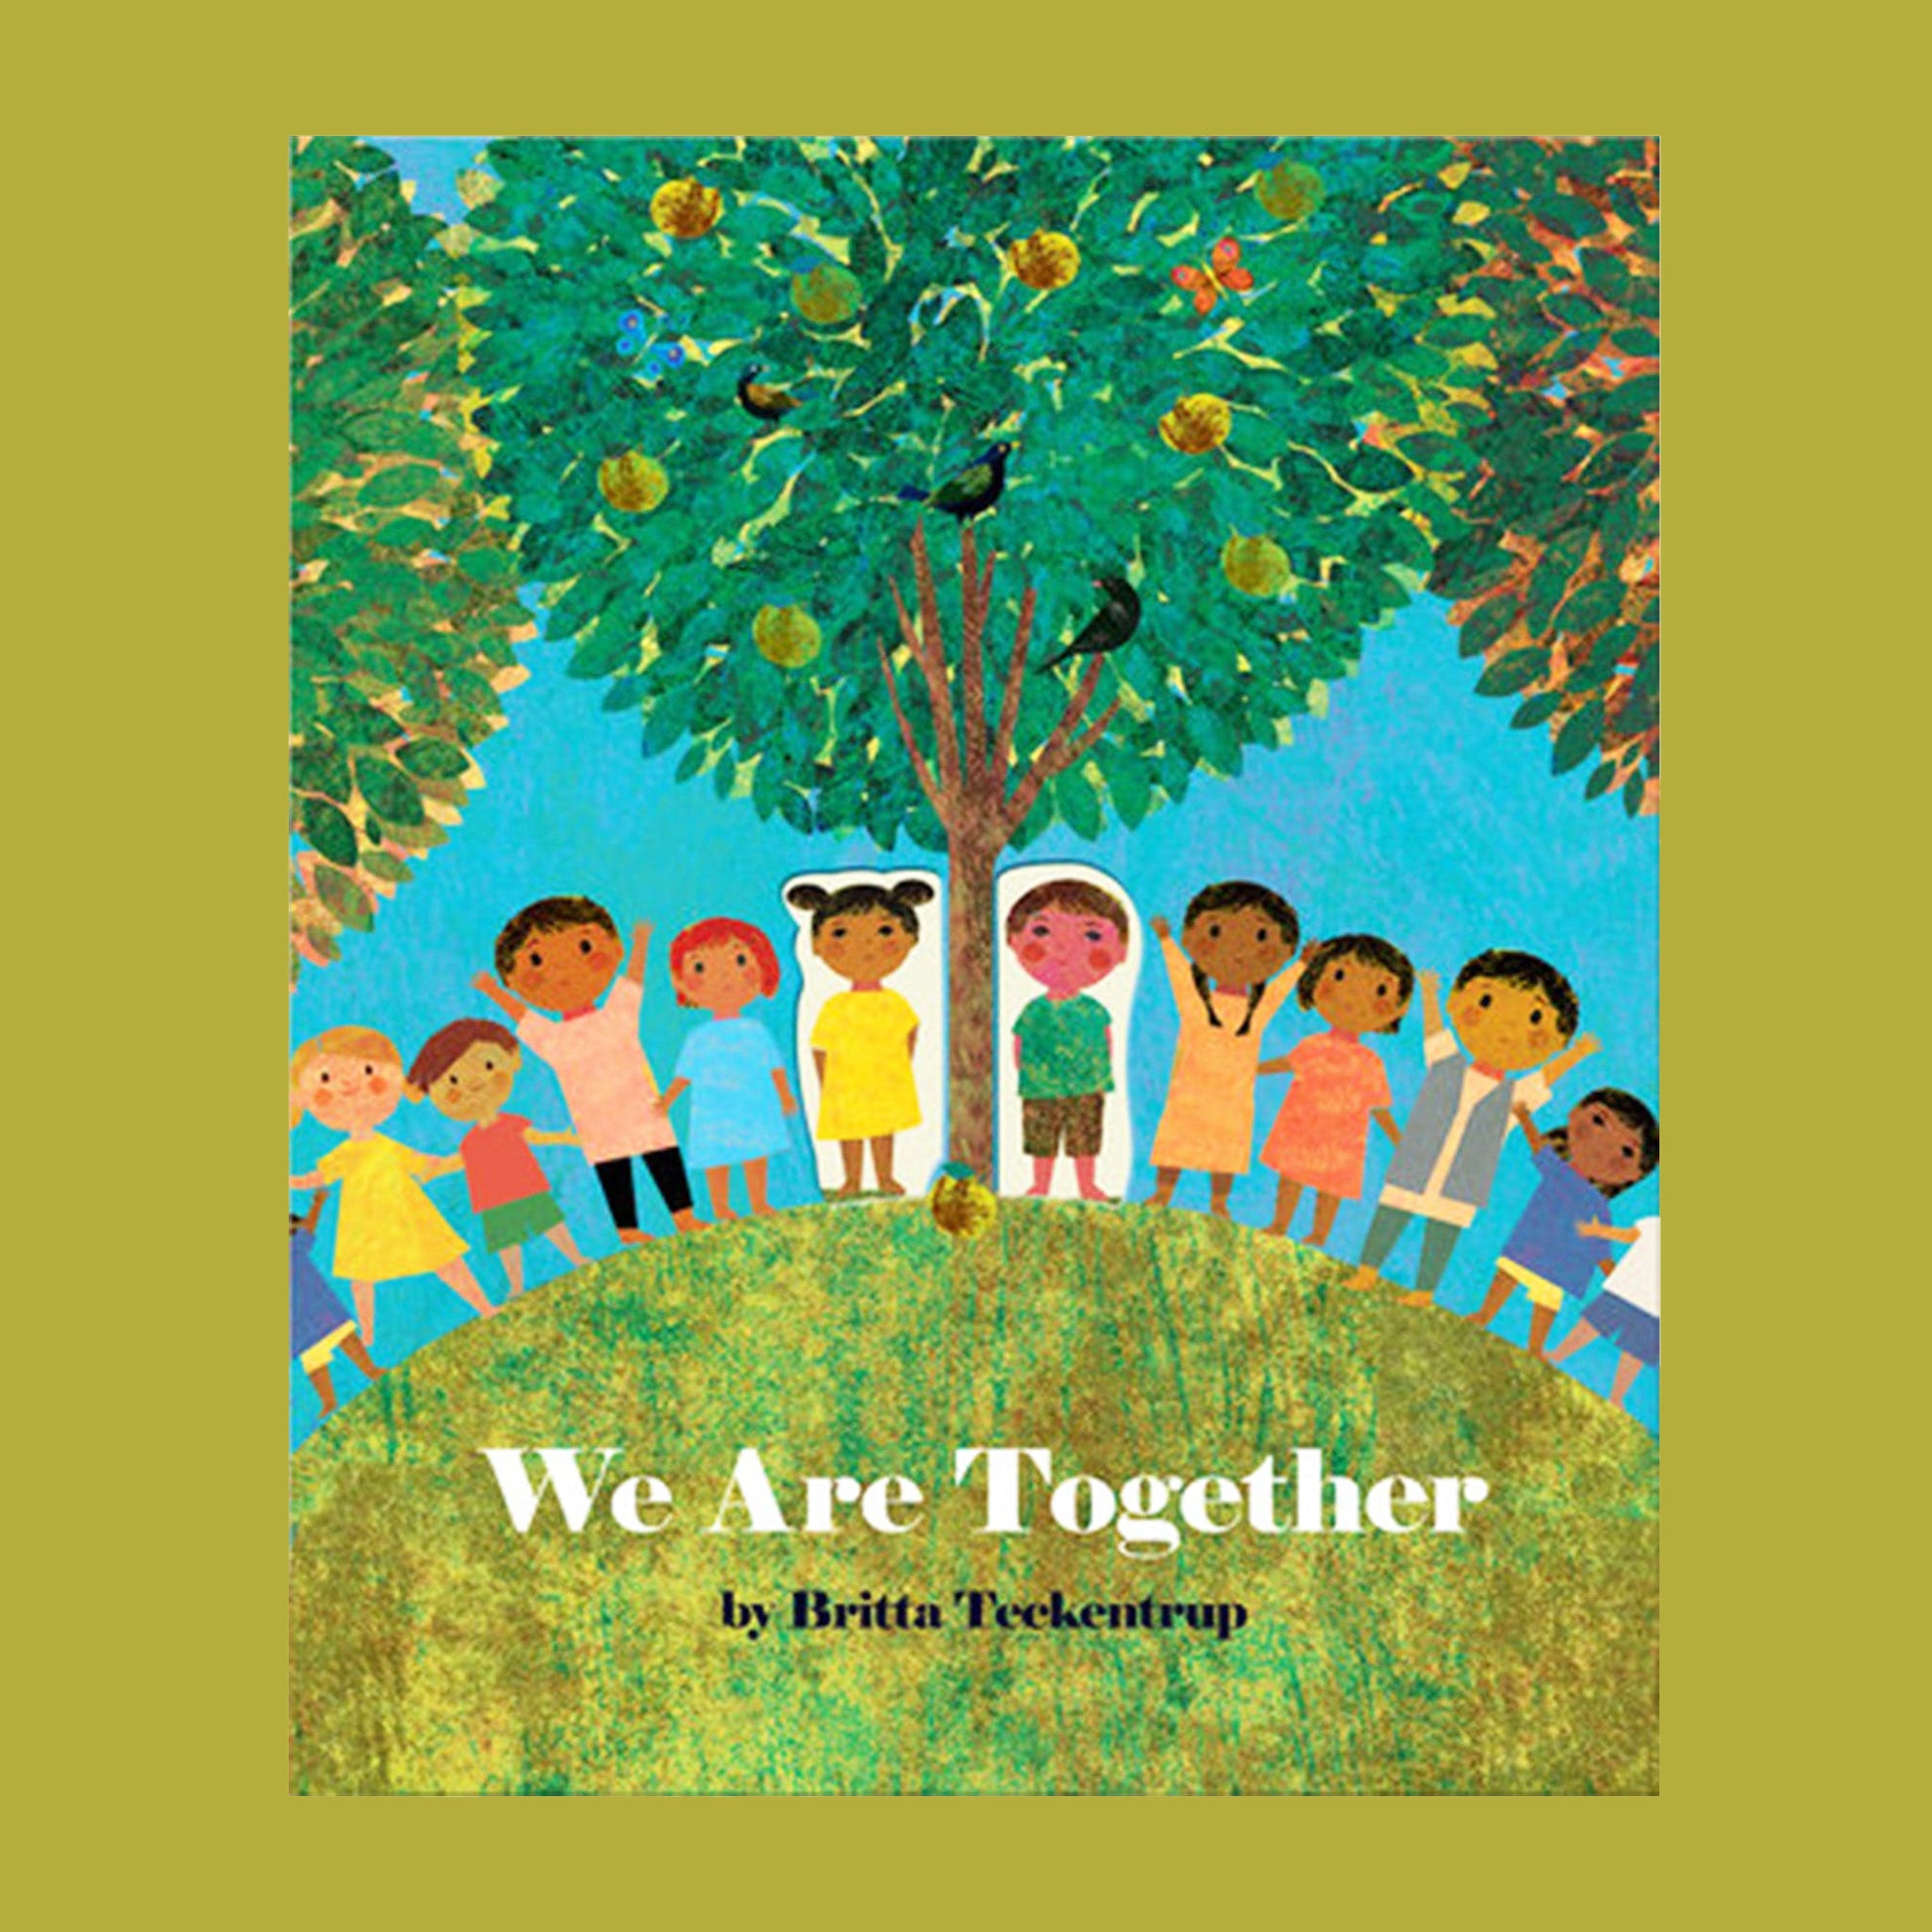 This children&#39;s picture book cover features a row of lively children standing side by side below three towering trees. The tree in the middle is in focus and the other two peak into the frame. The title reads &#39;We Are Together&#39; in white text over the textured green, round hill the children stand on.